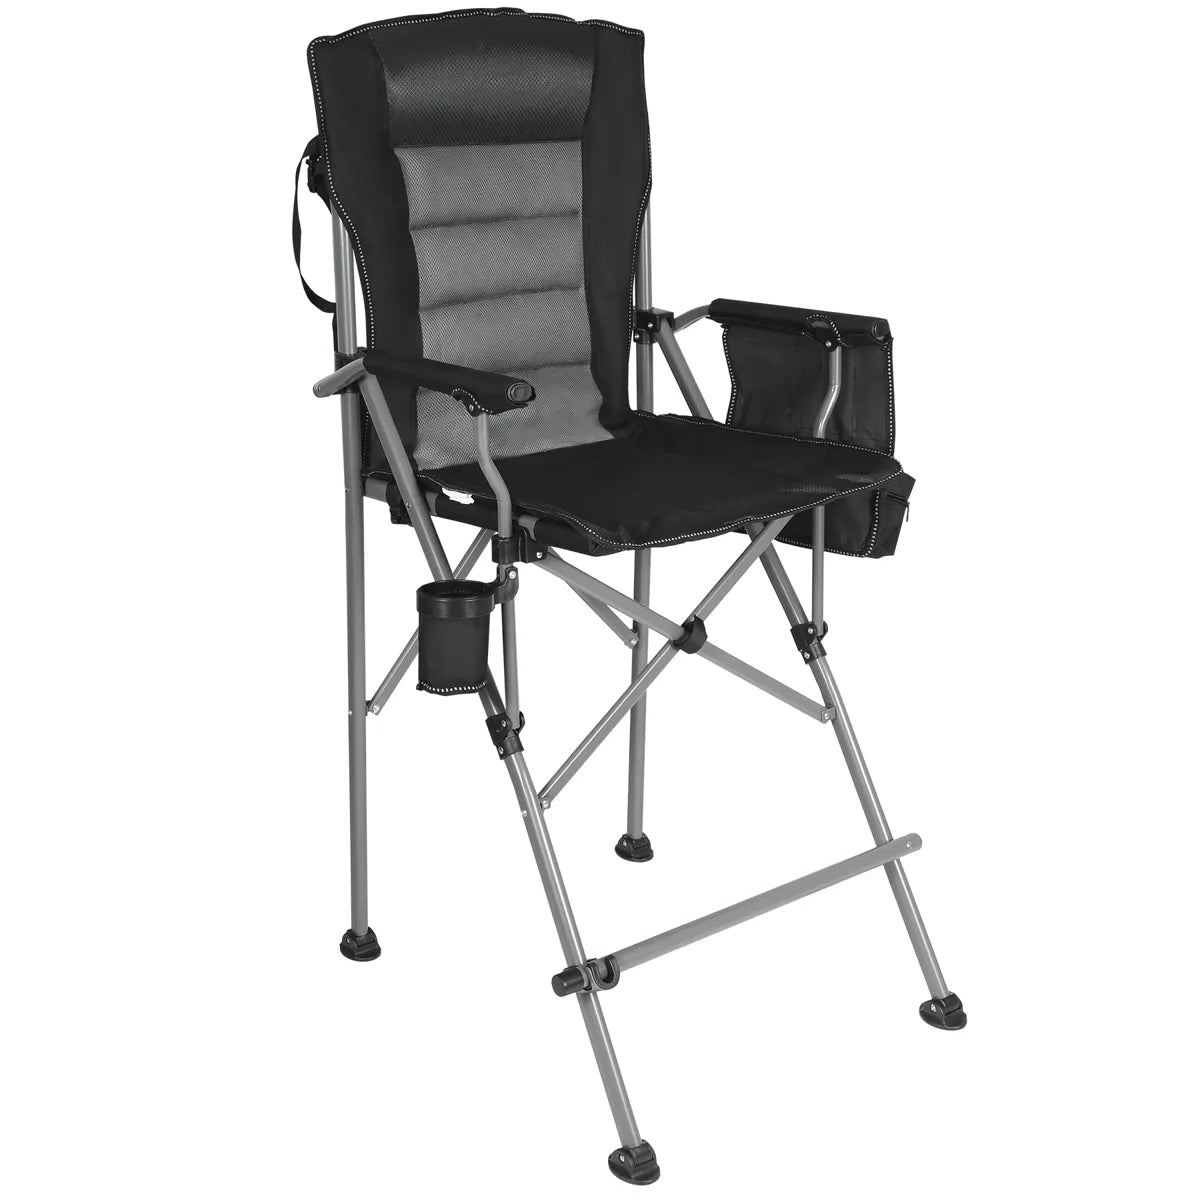 Extra Tall Bar Height Foldable Director Chairs for Adults with High Back and Hard Arms, Support 330lbs